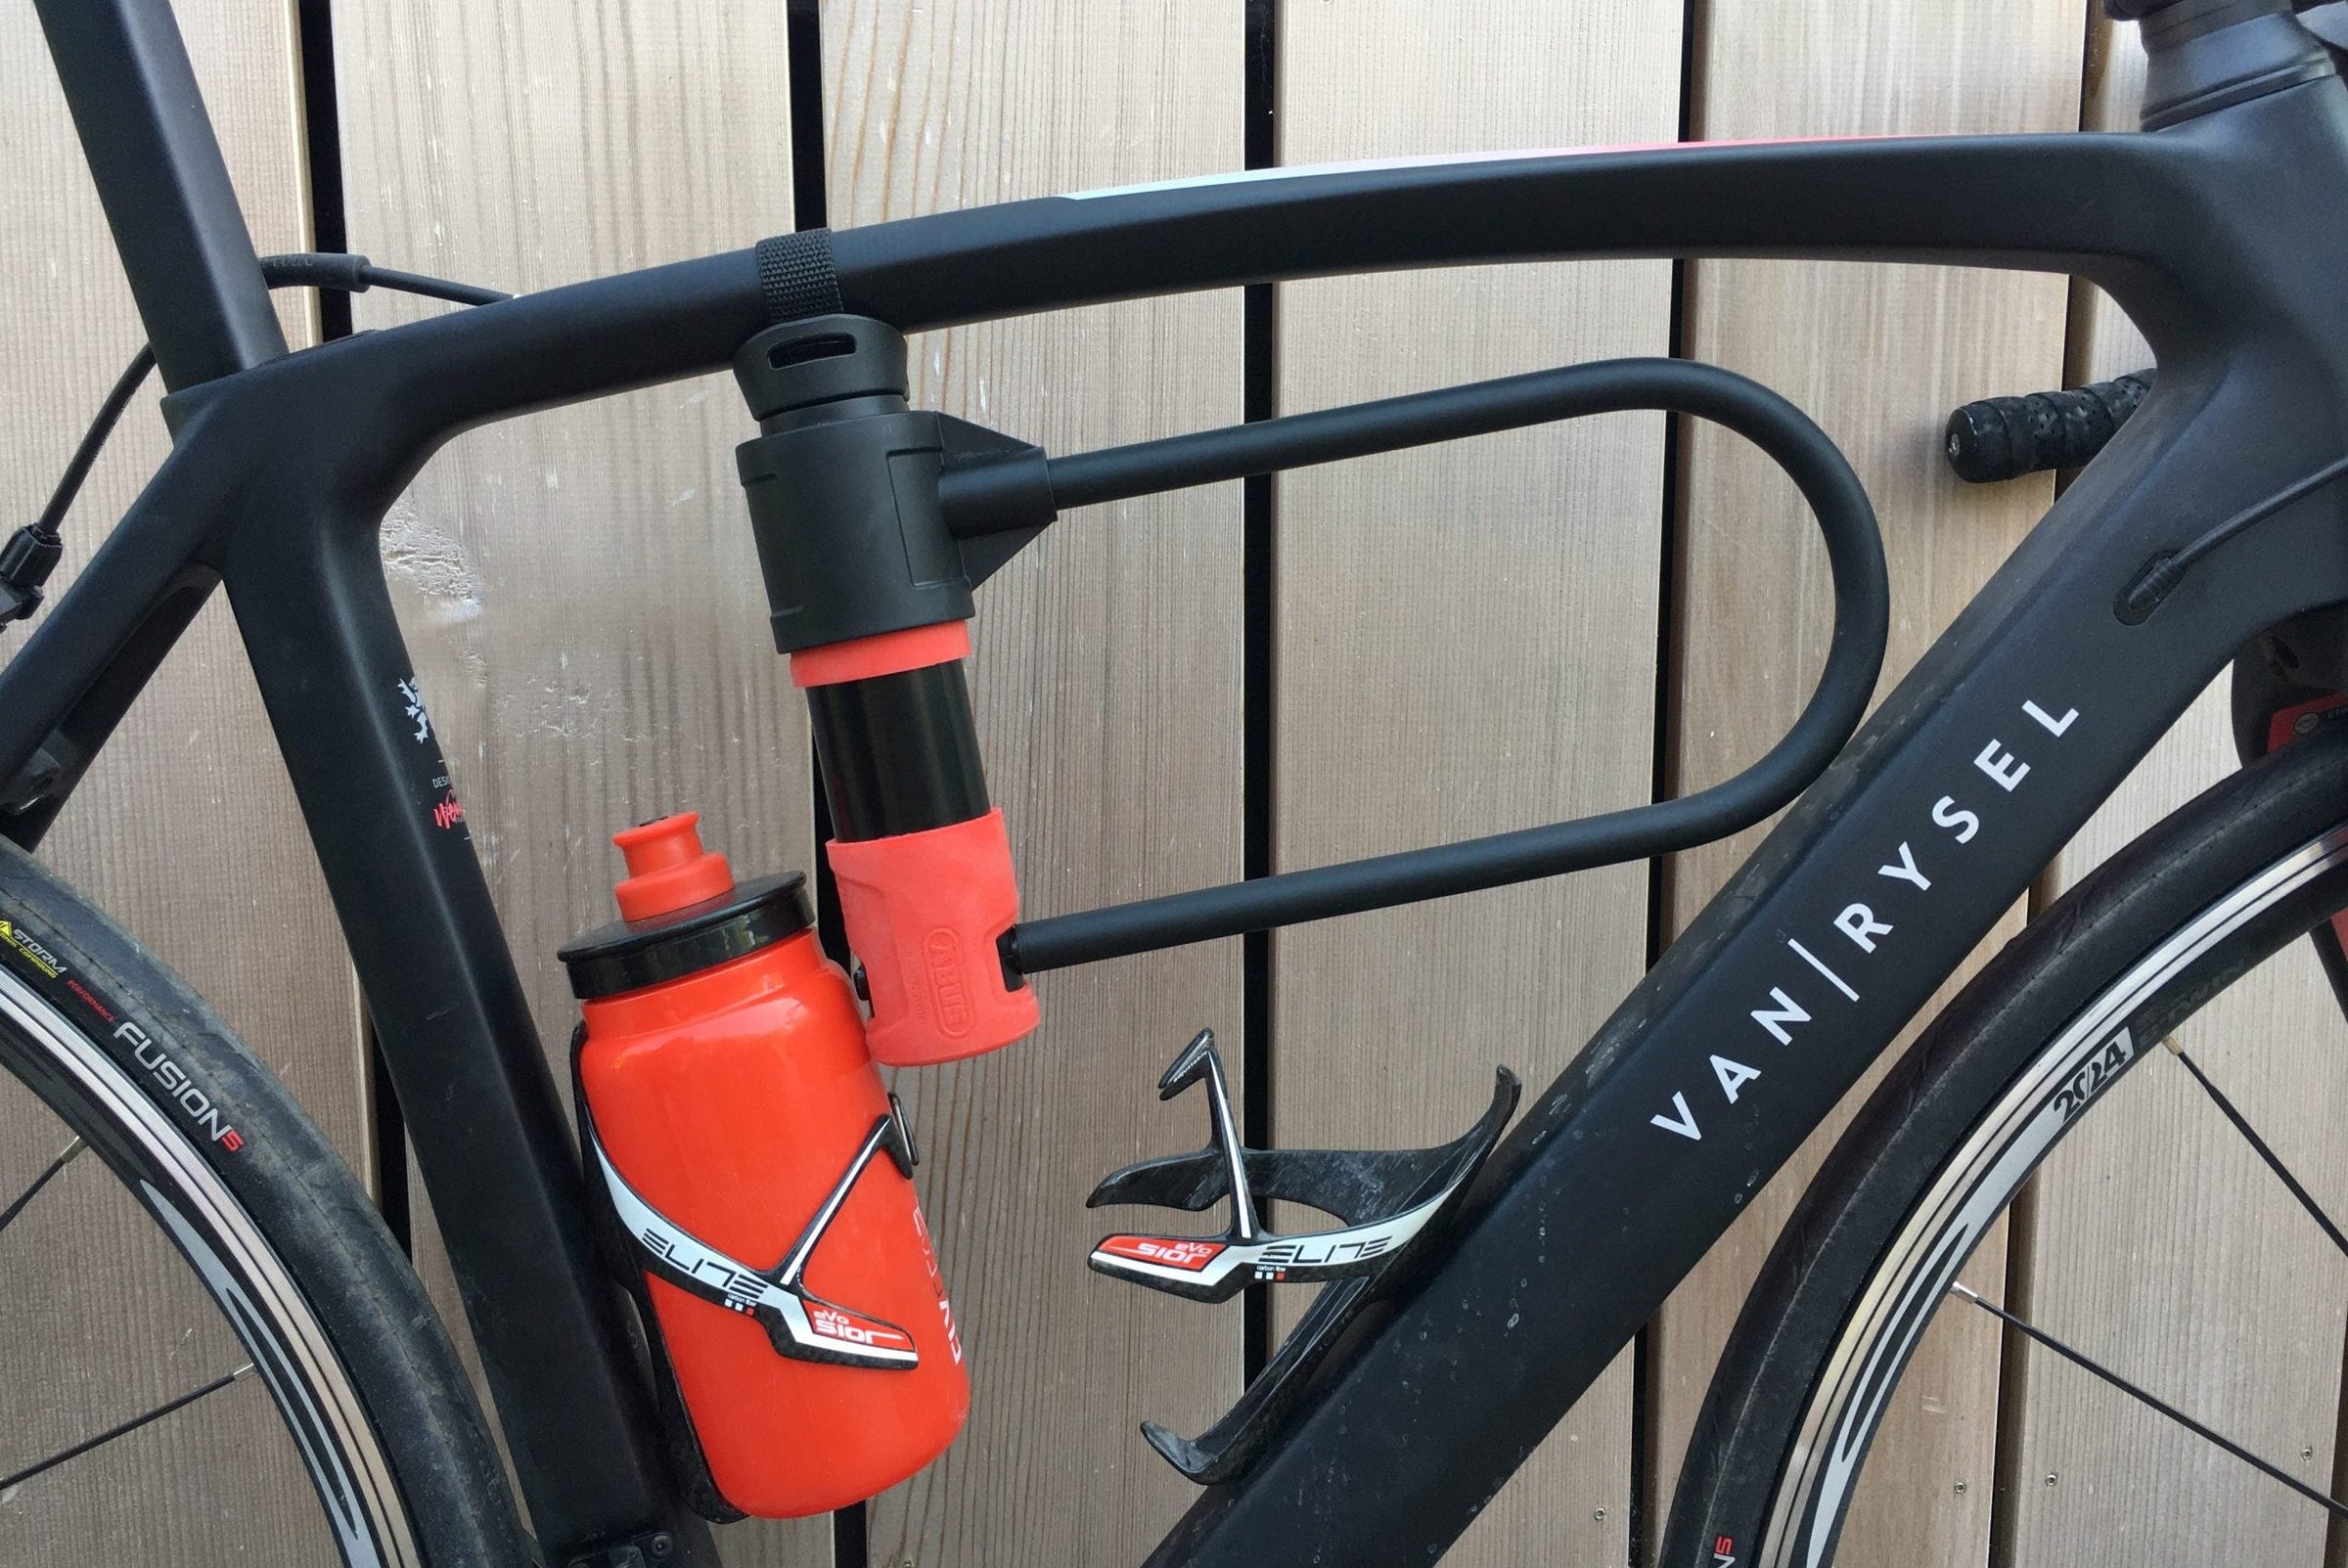 Water Bottle and Bike locks at smith creek cycle